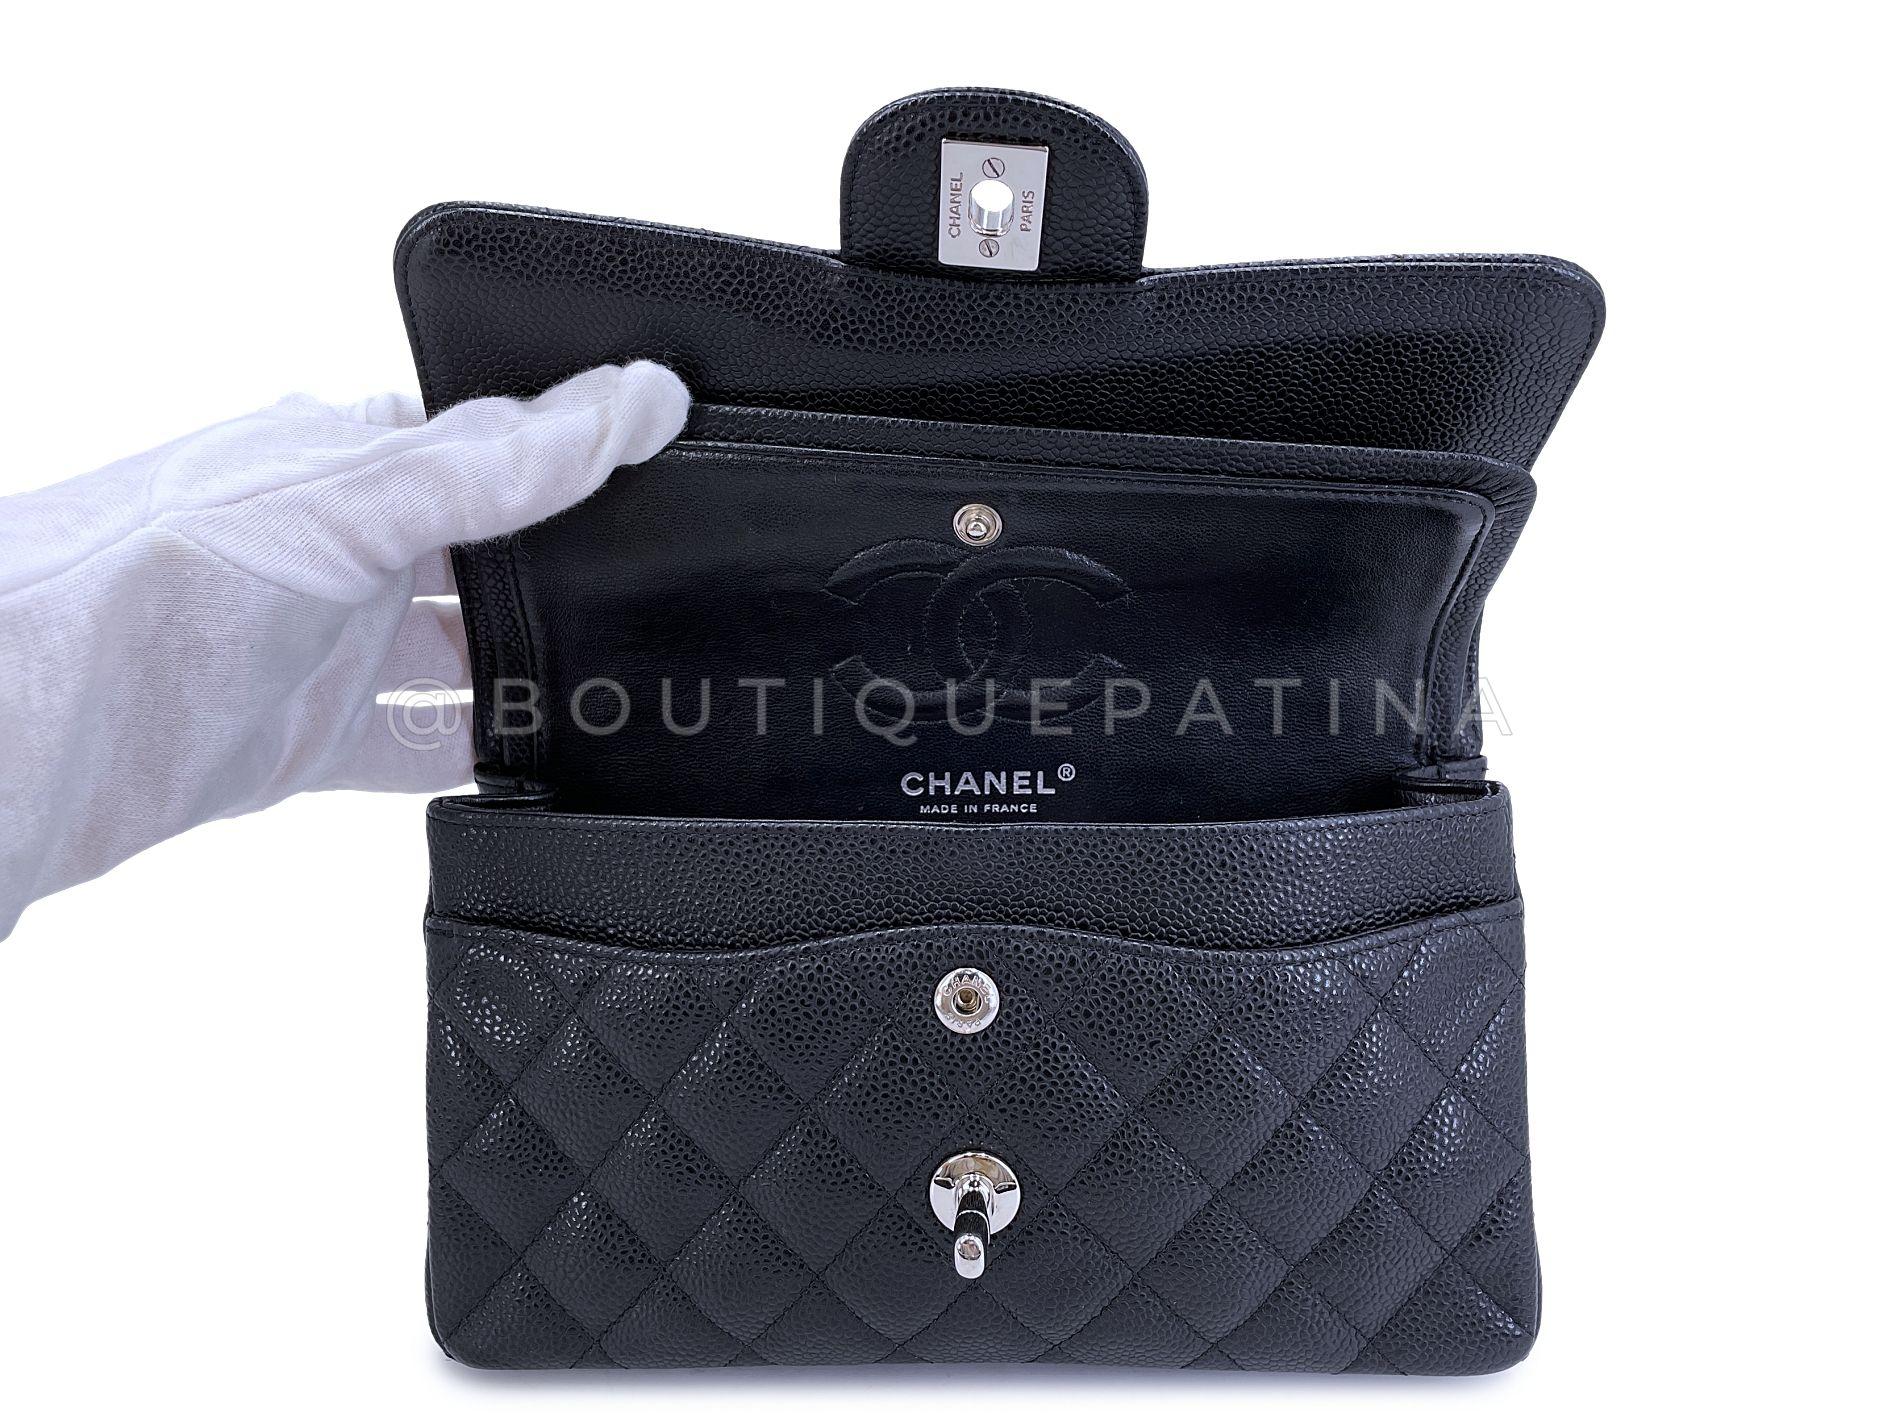 Chanel Black Caviar Small Classic Double Flap Bag SHW 67981 For Sale 5